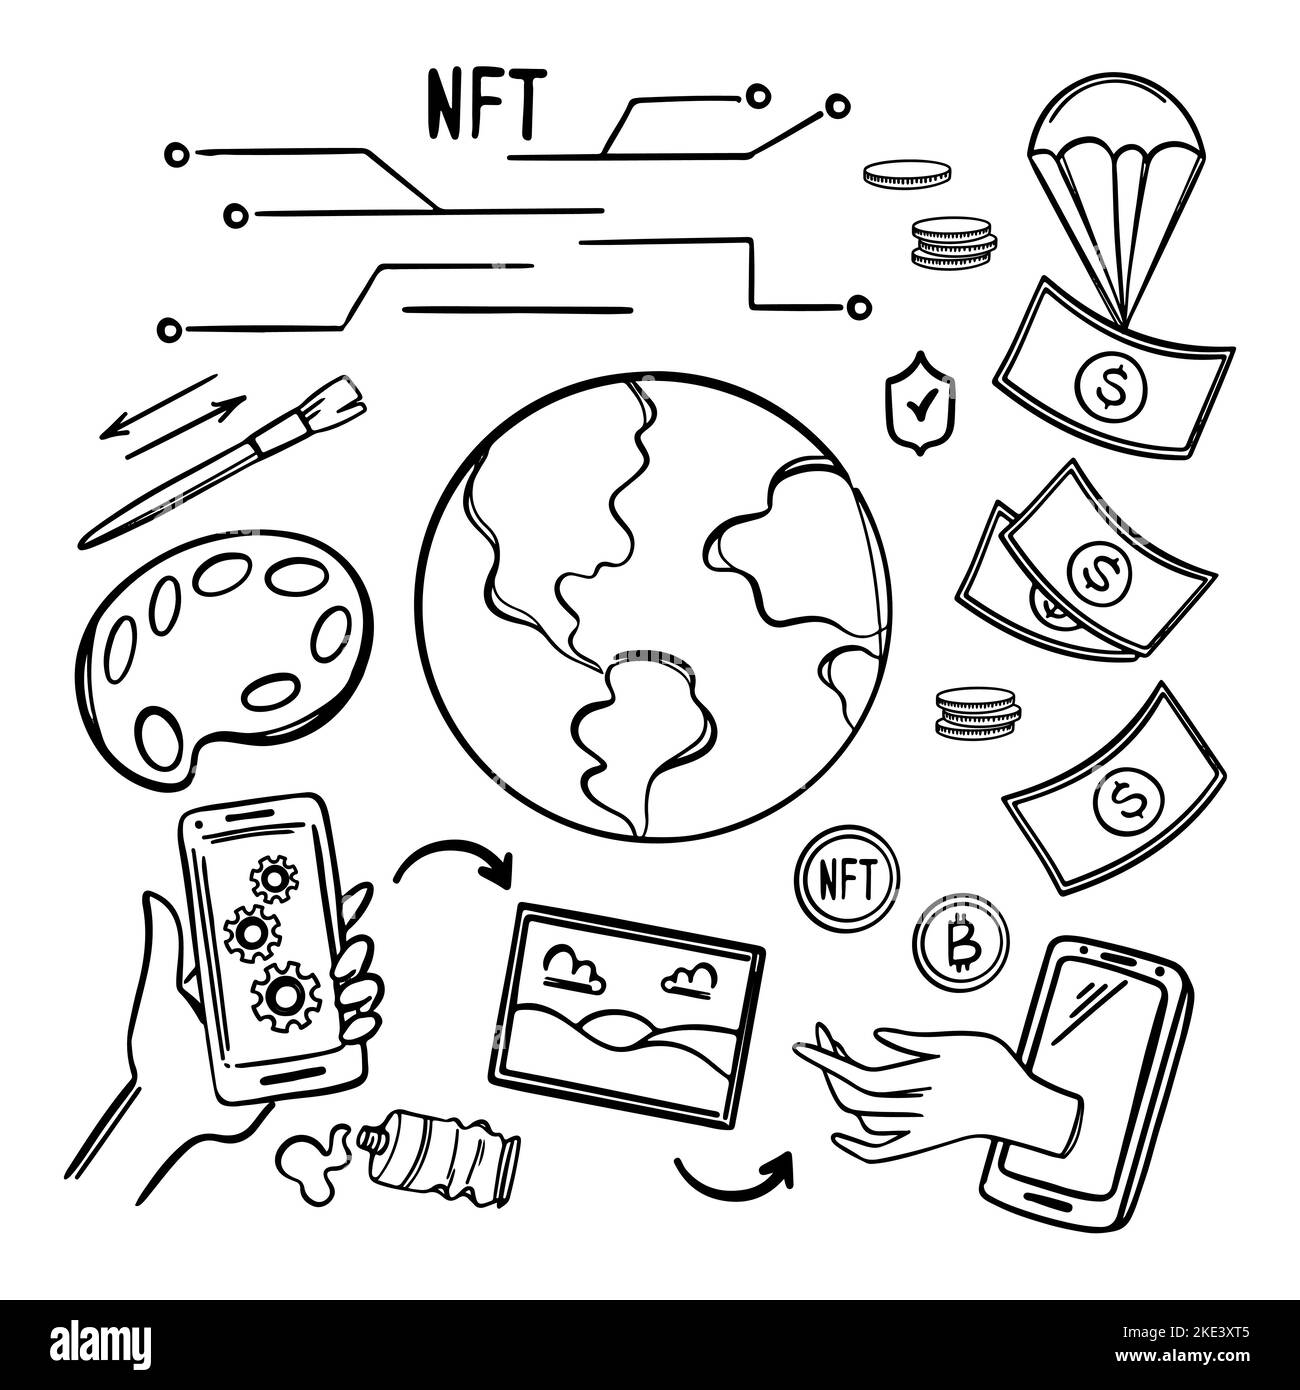 NFT MARKET BUYING Store Online Selling Of Arts And Musical Works For Crypto Network Technology For Trade Marketplace With Non-fungible Token For Comme Stock Vector